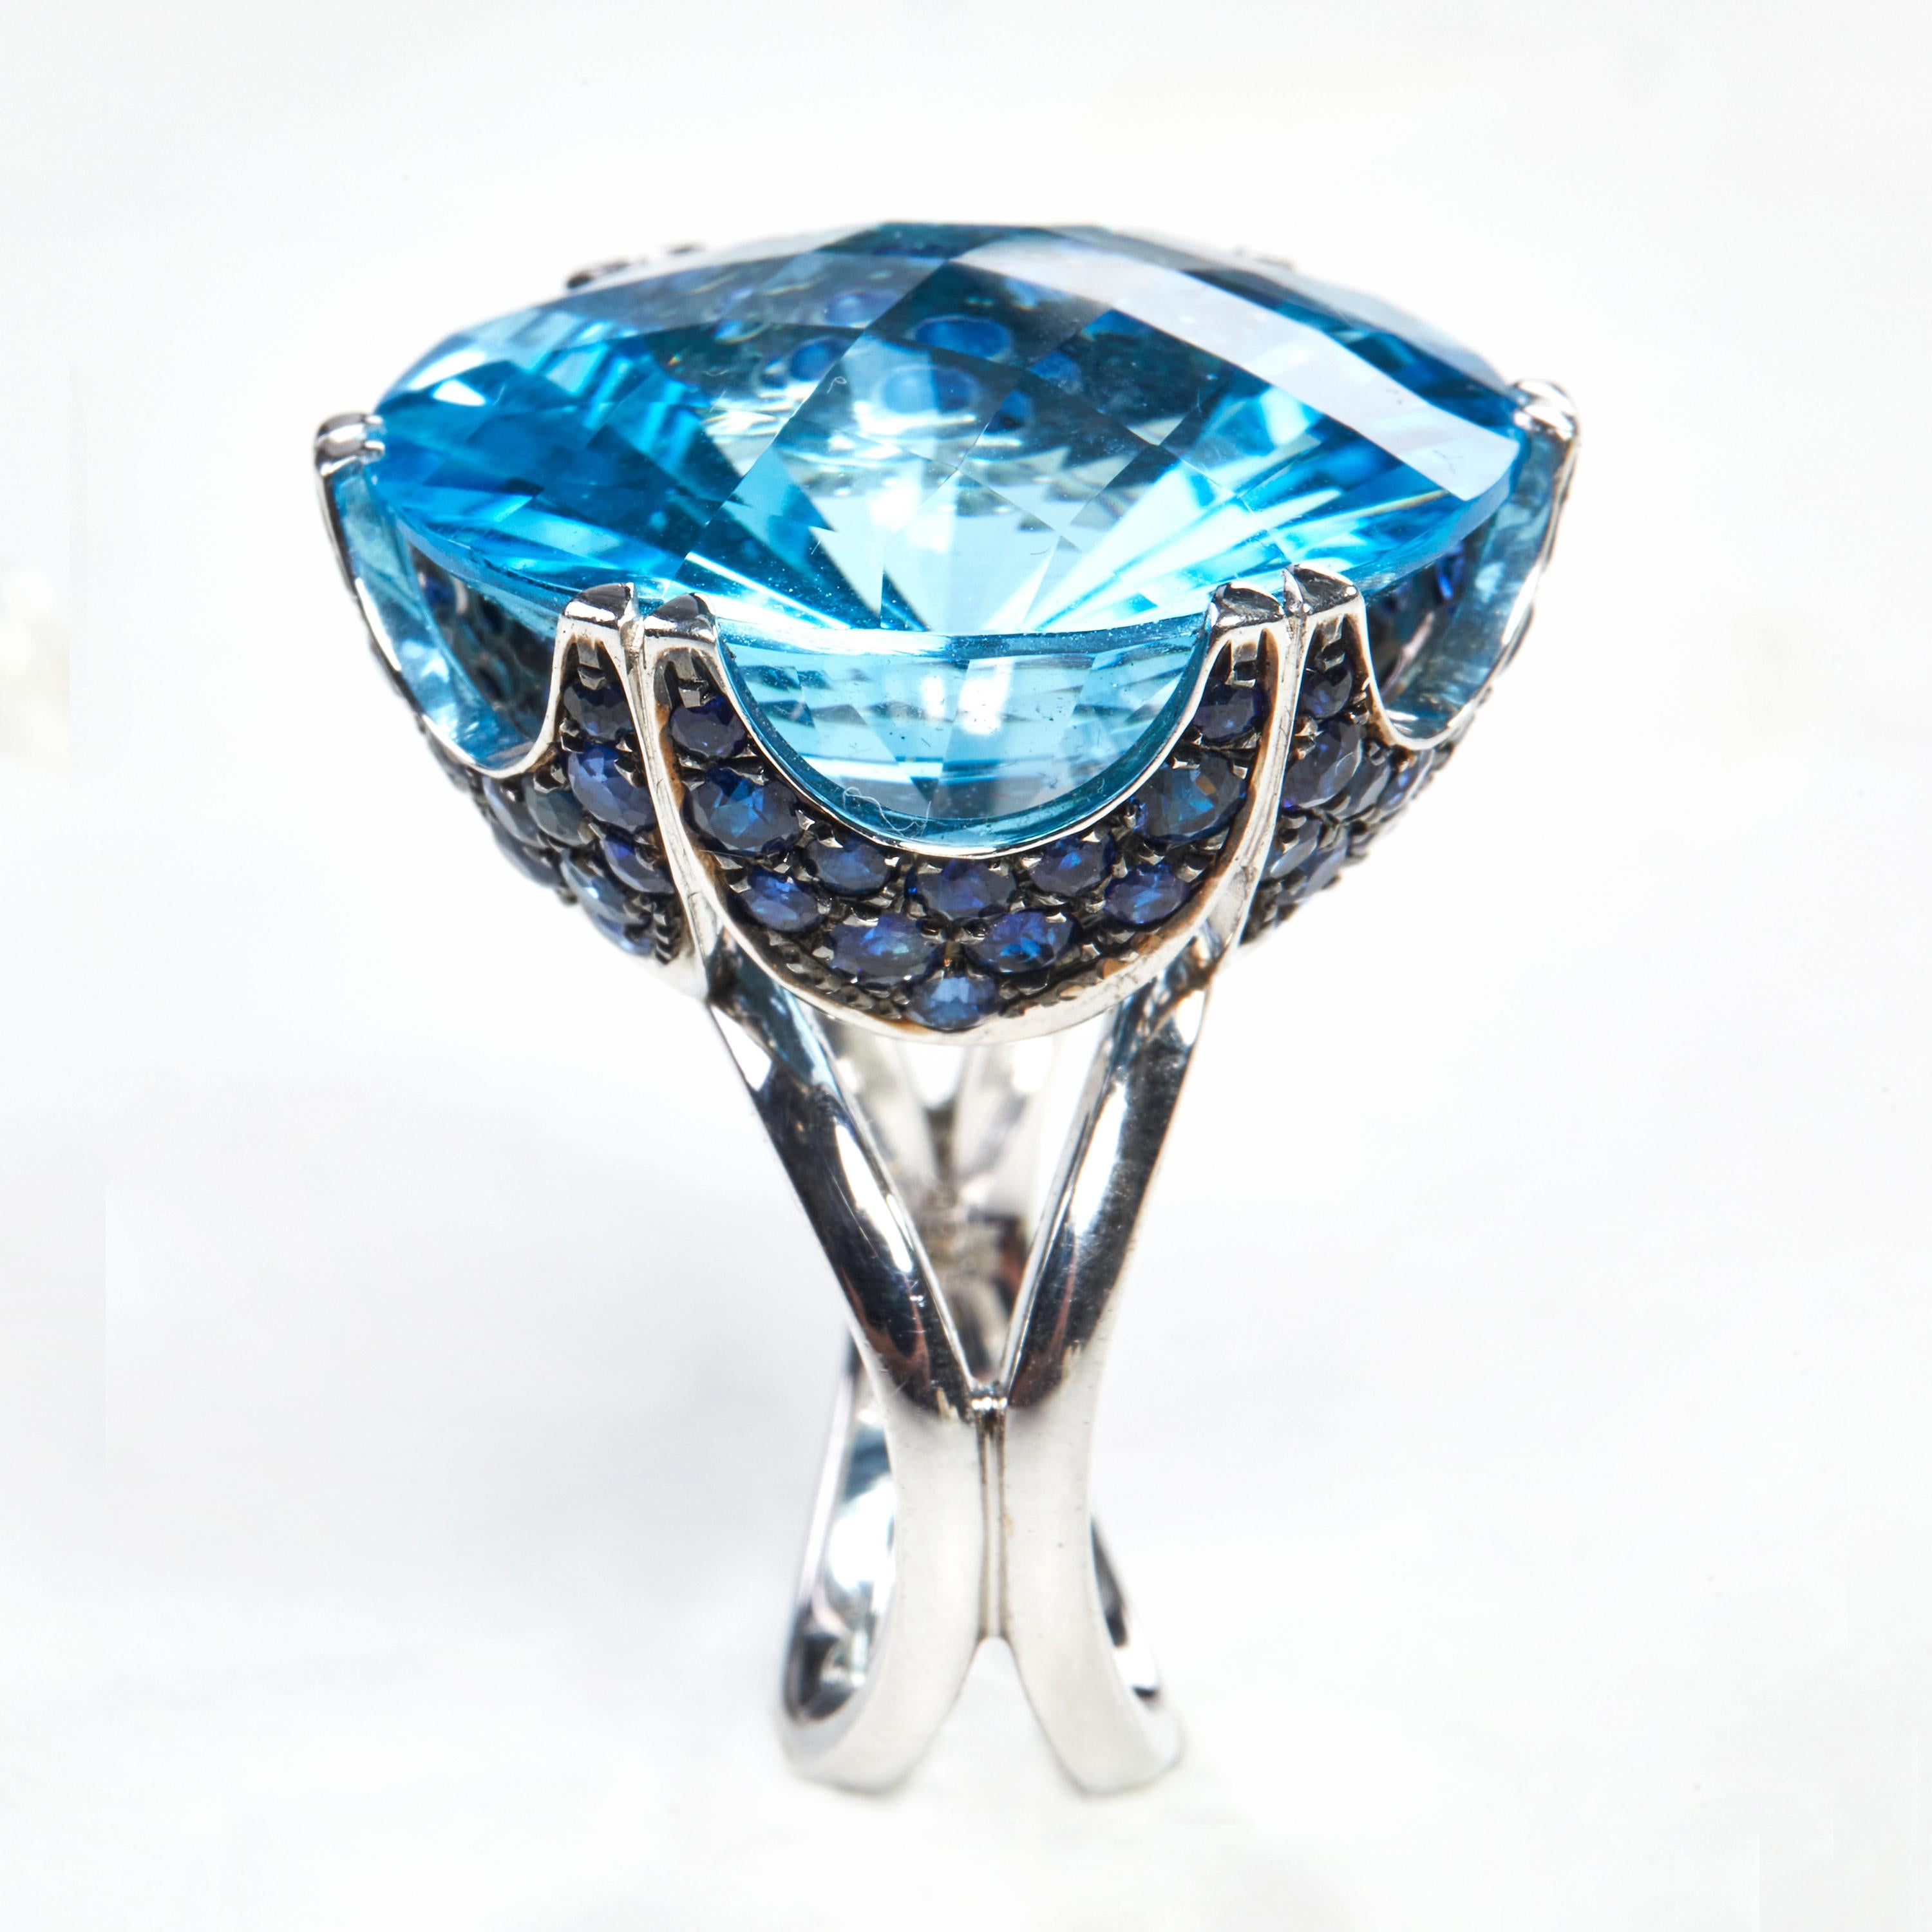 18 Karat White Gold Sapphire  and Topaz Cocktail Ring

84 Sapphire 4.56 carat
1 Topaz 51.92  Carat

Size EU 55 US 7.2


Founded in 1974, Gianni Lazzaro is a family-owned jewelry company based out of Düsseldorf, Germany.
Although rooted in Germany,